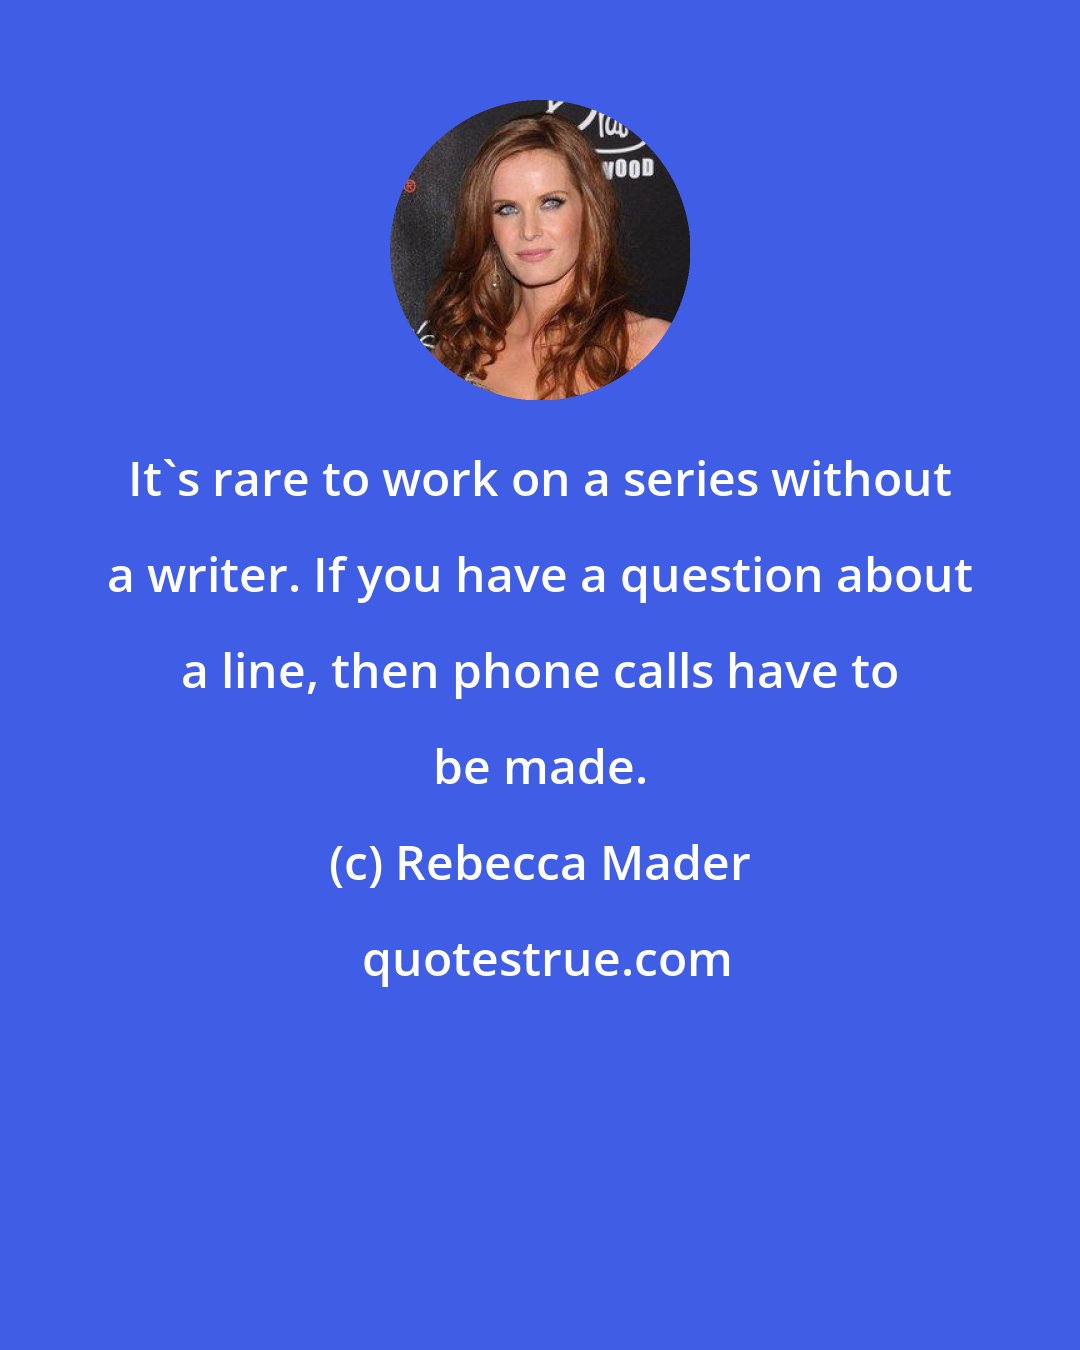 Rebecca Mader: It's rare to work on a series without a writer. If you have a question about a line, then phone calls have to be made.